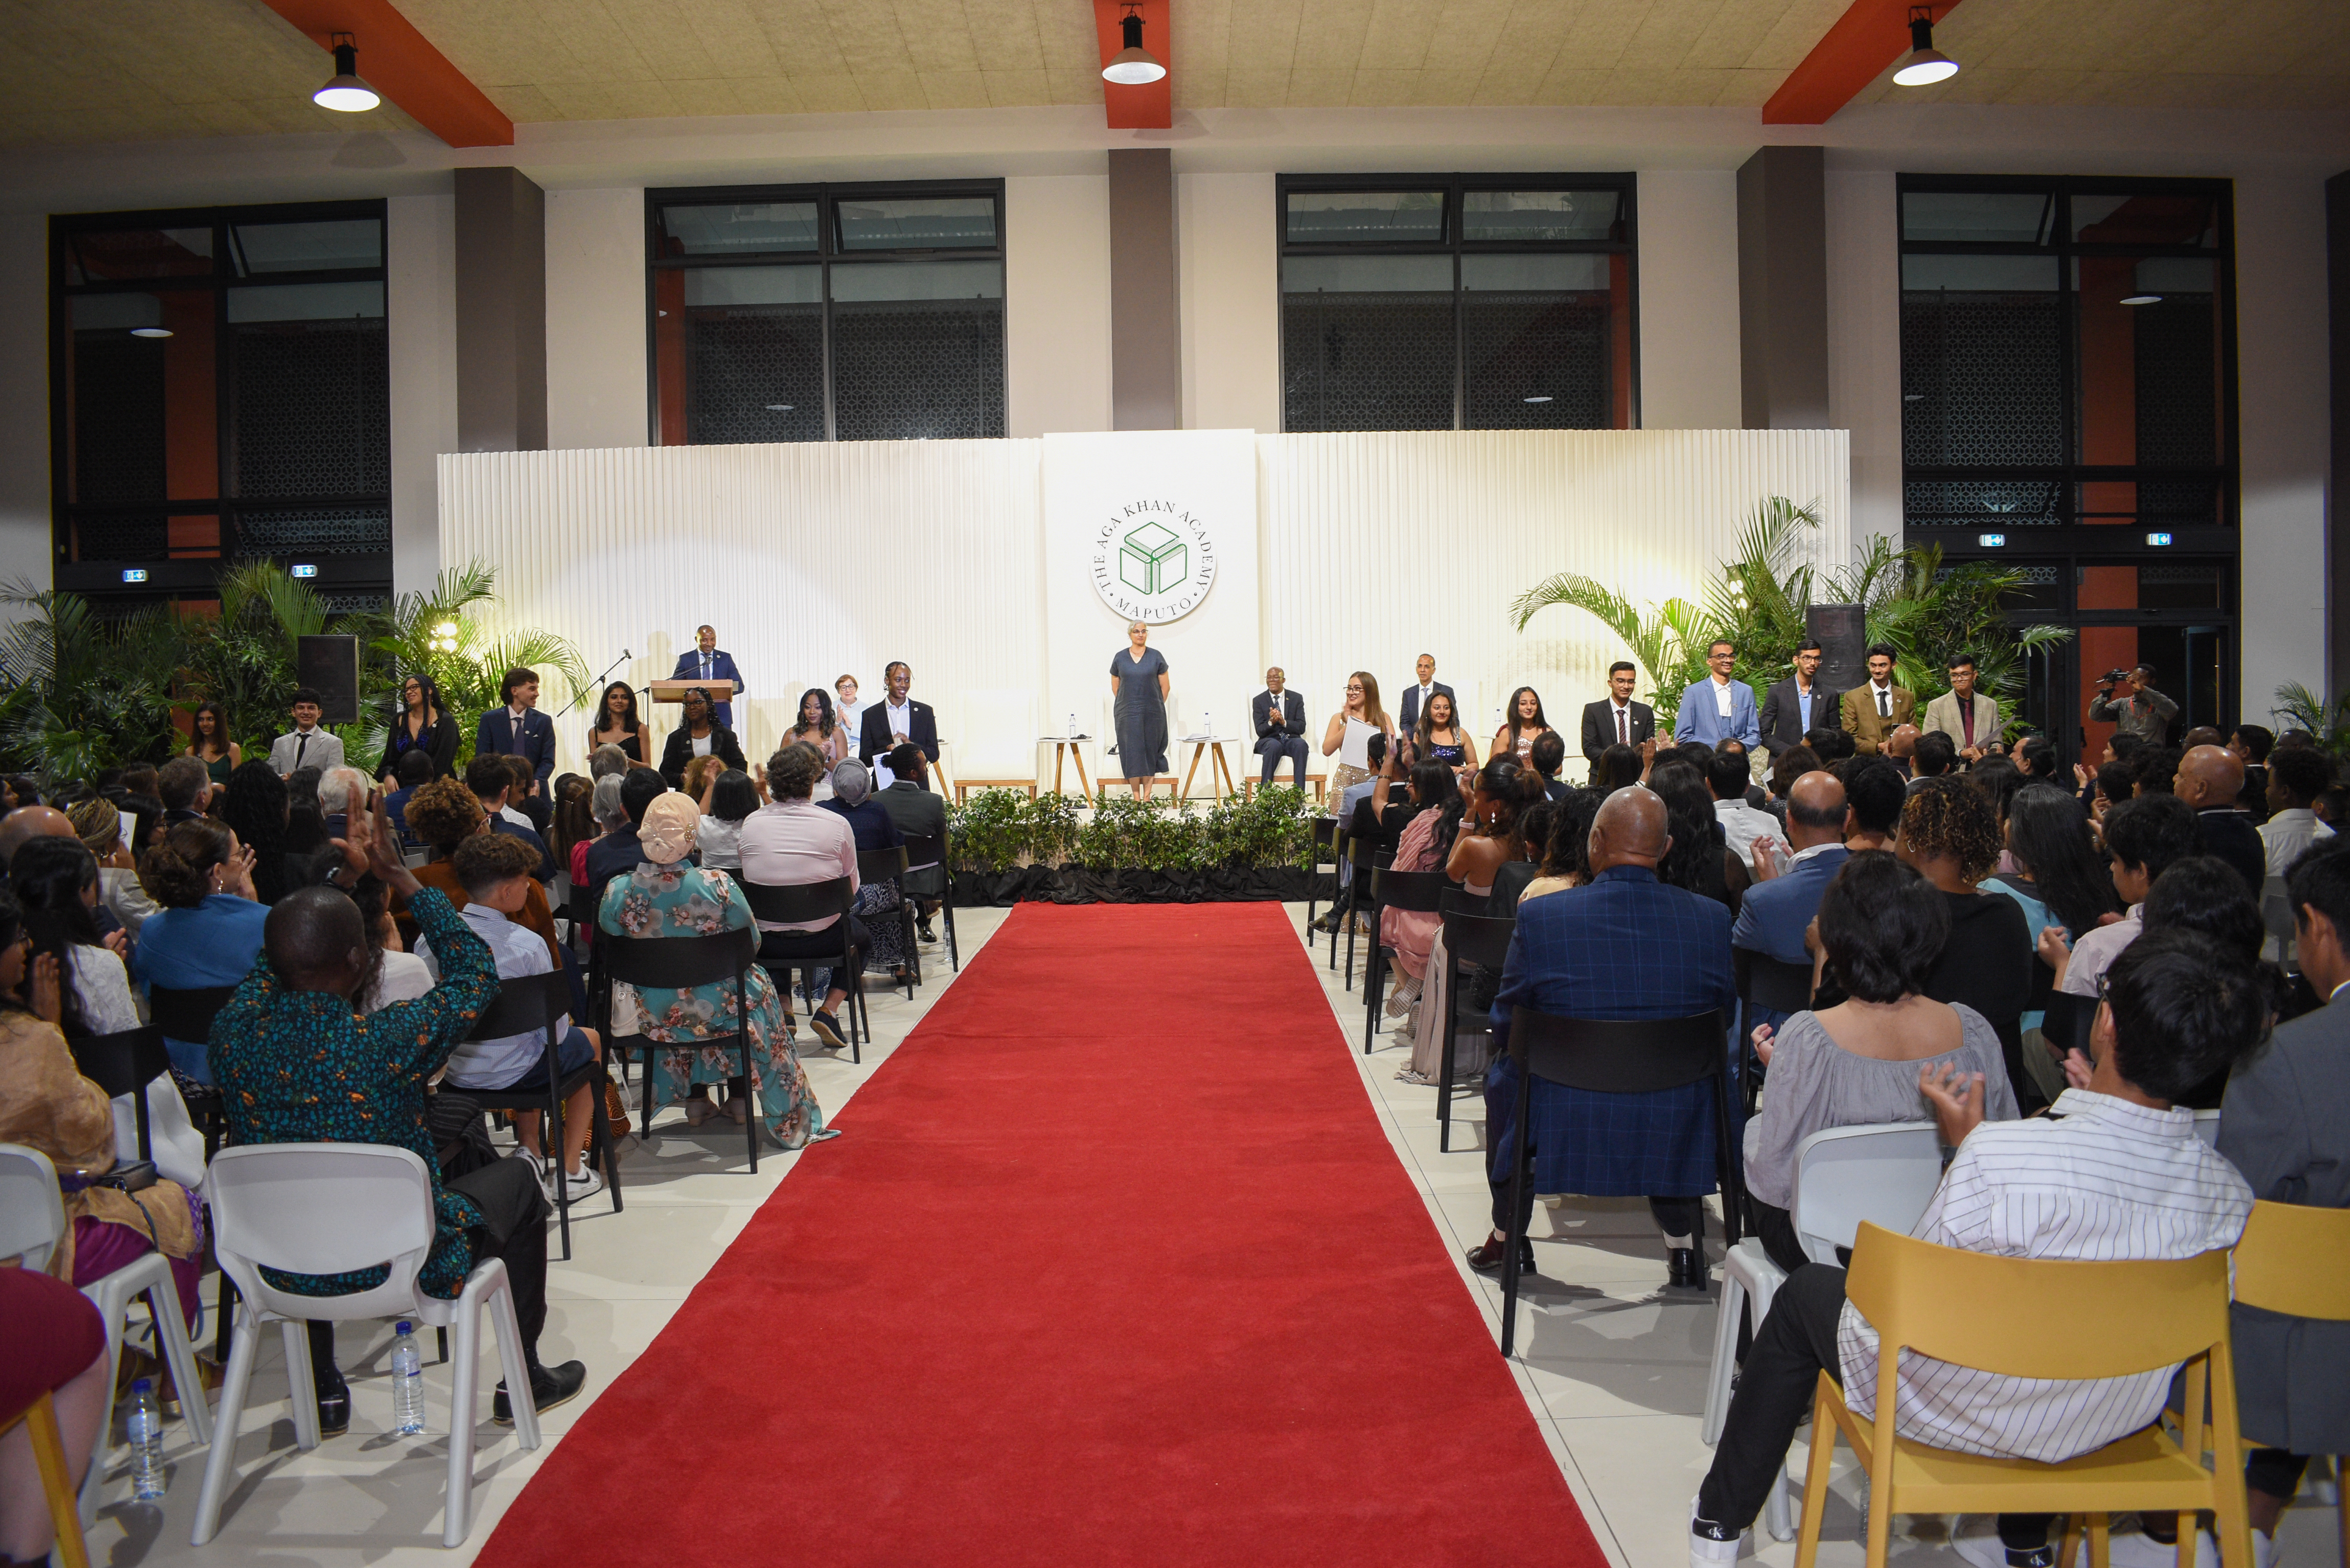 The Aga Khan Academy Maputo's Class of 2023 consists of 16 talented students from Angola, Belgium, the Democratic Republic of Congo, Mozambique, Portugal and Rwanda